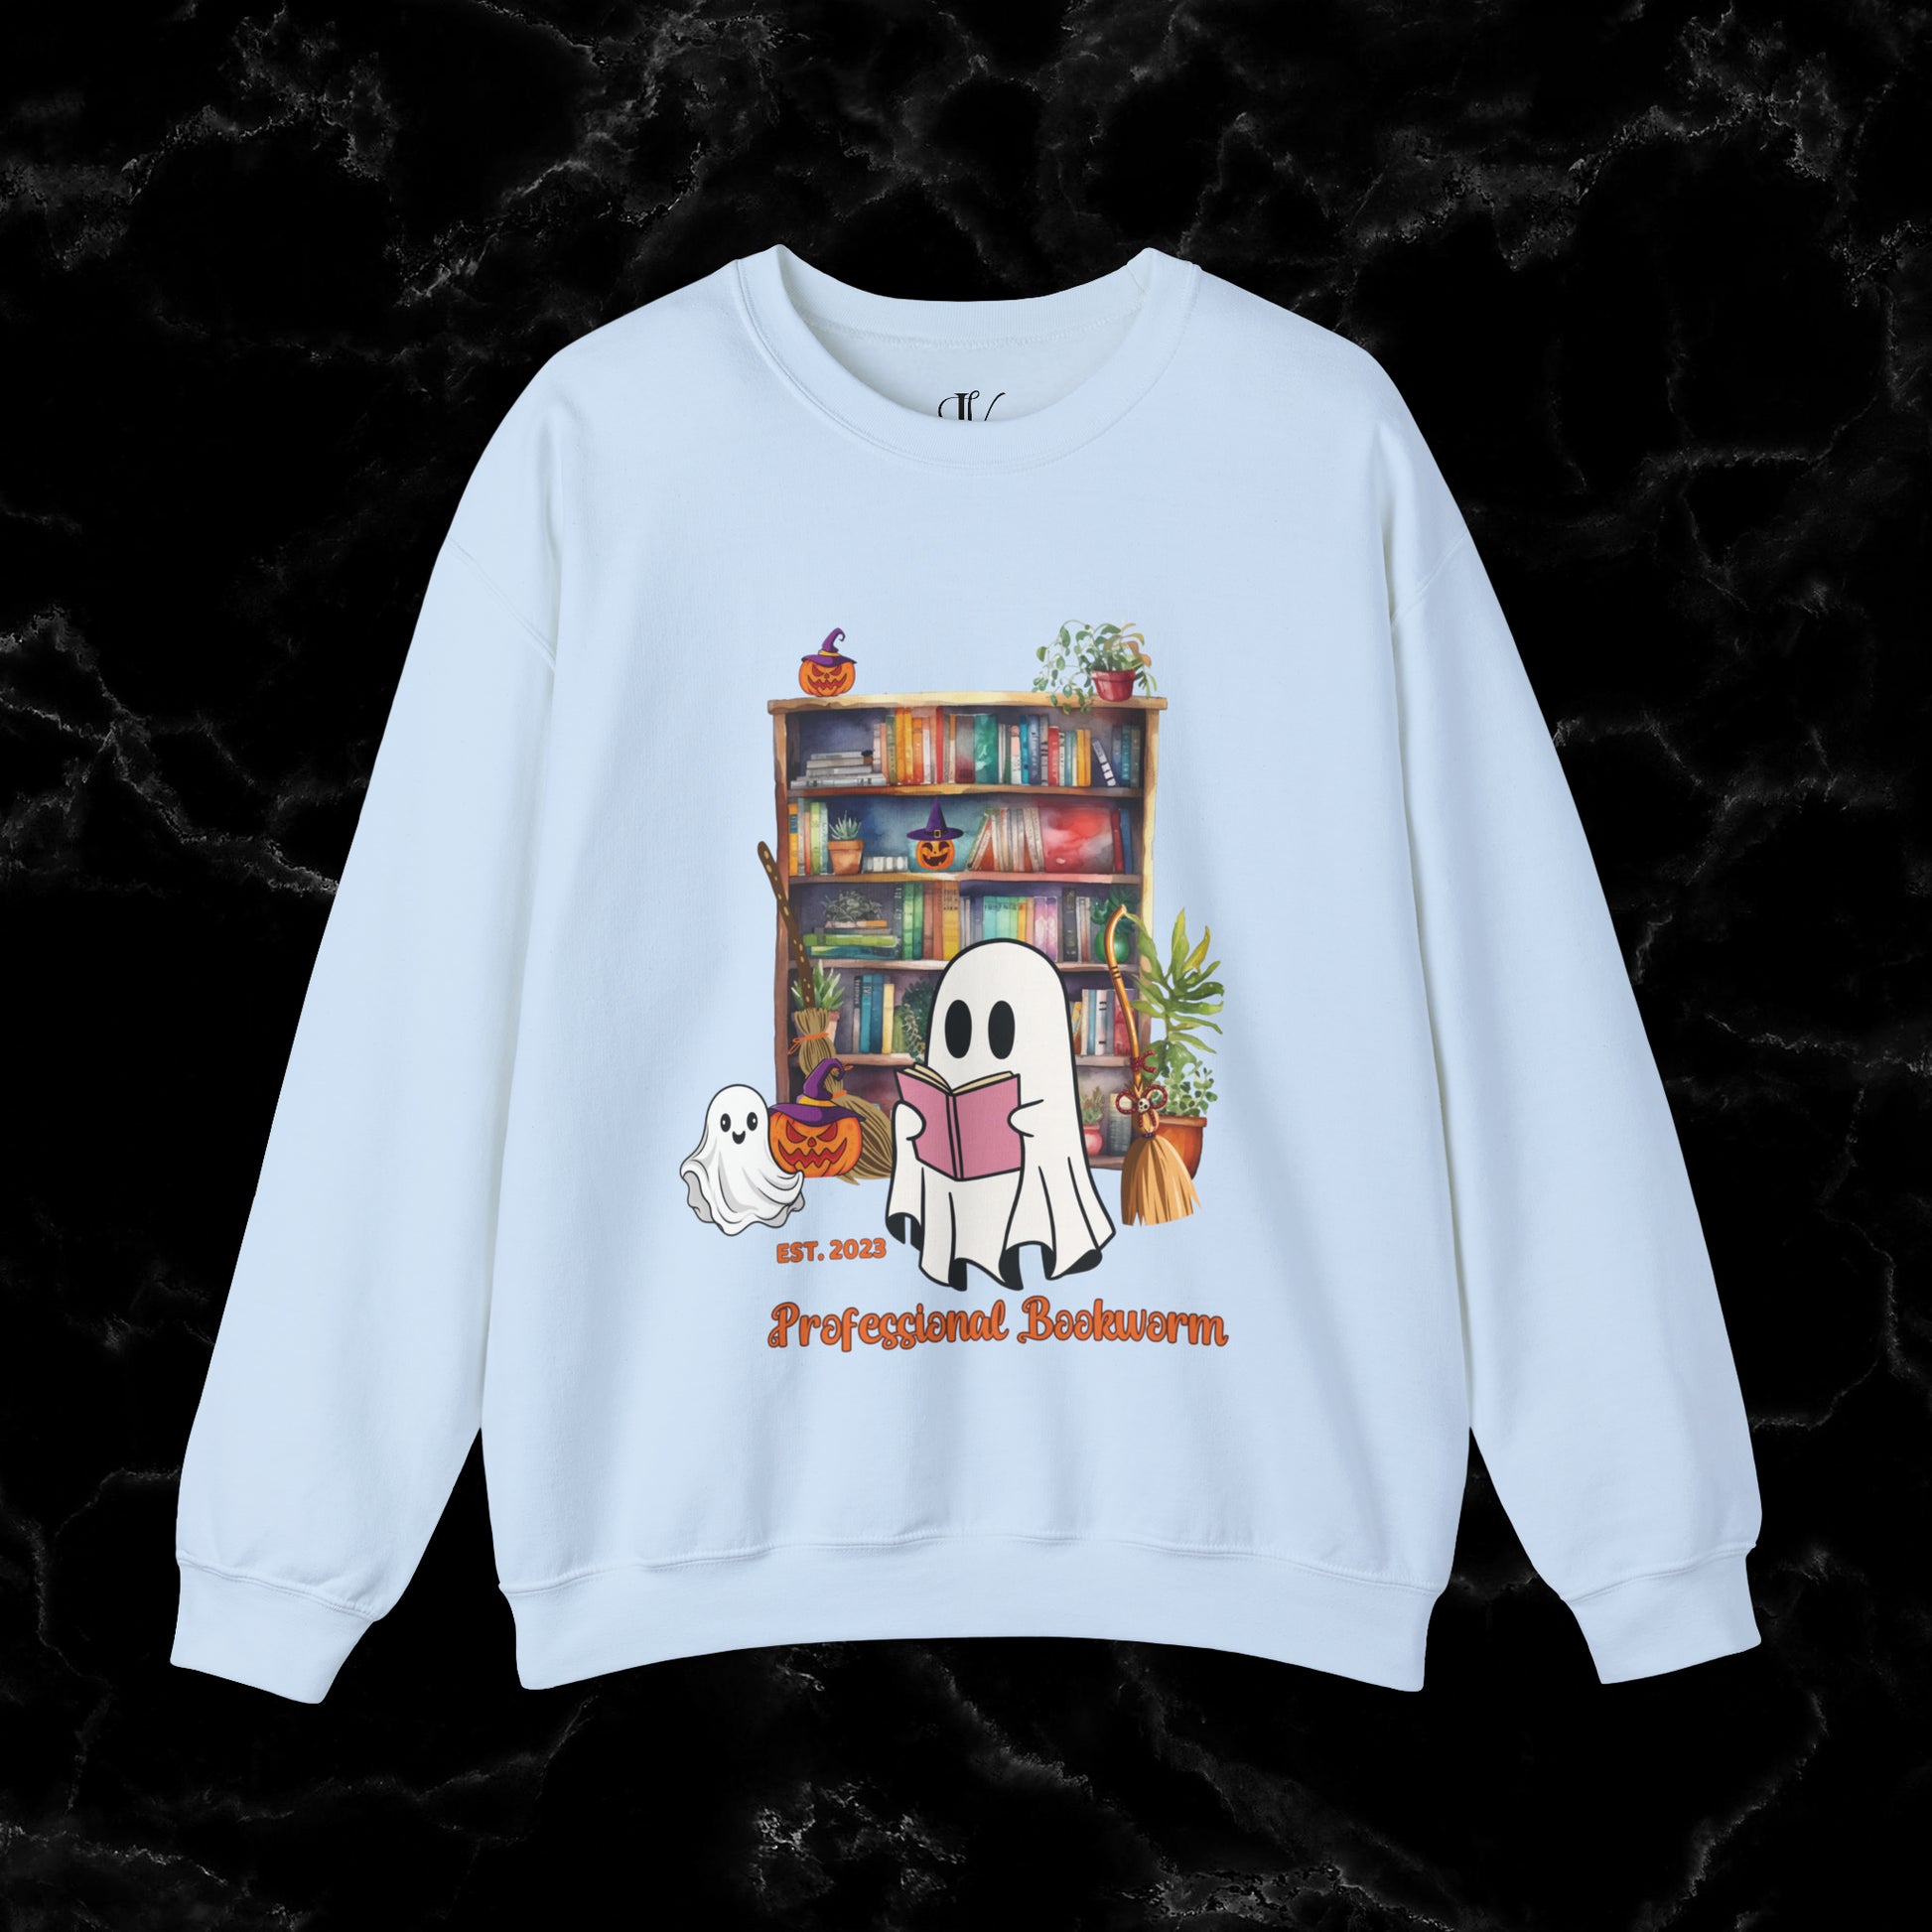 Witchy Gifts for Book Lover Cottagecore Pumpkin Witch Sweatshirt - Bookworm Back To School Reading Fall Sweater, Perfect Present for Bookworm Aunt's Birthday Sweatshirt S Light Blue 